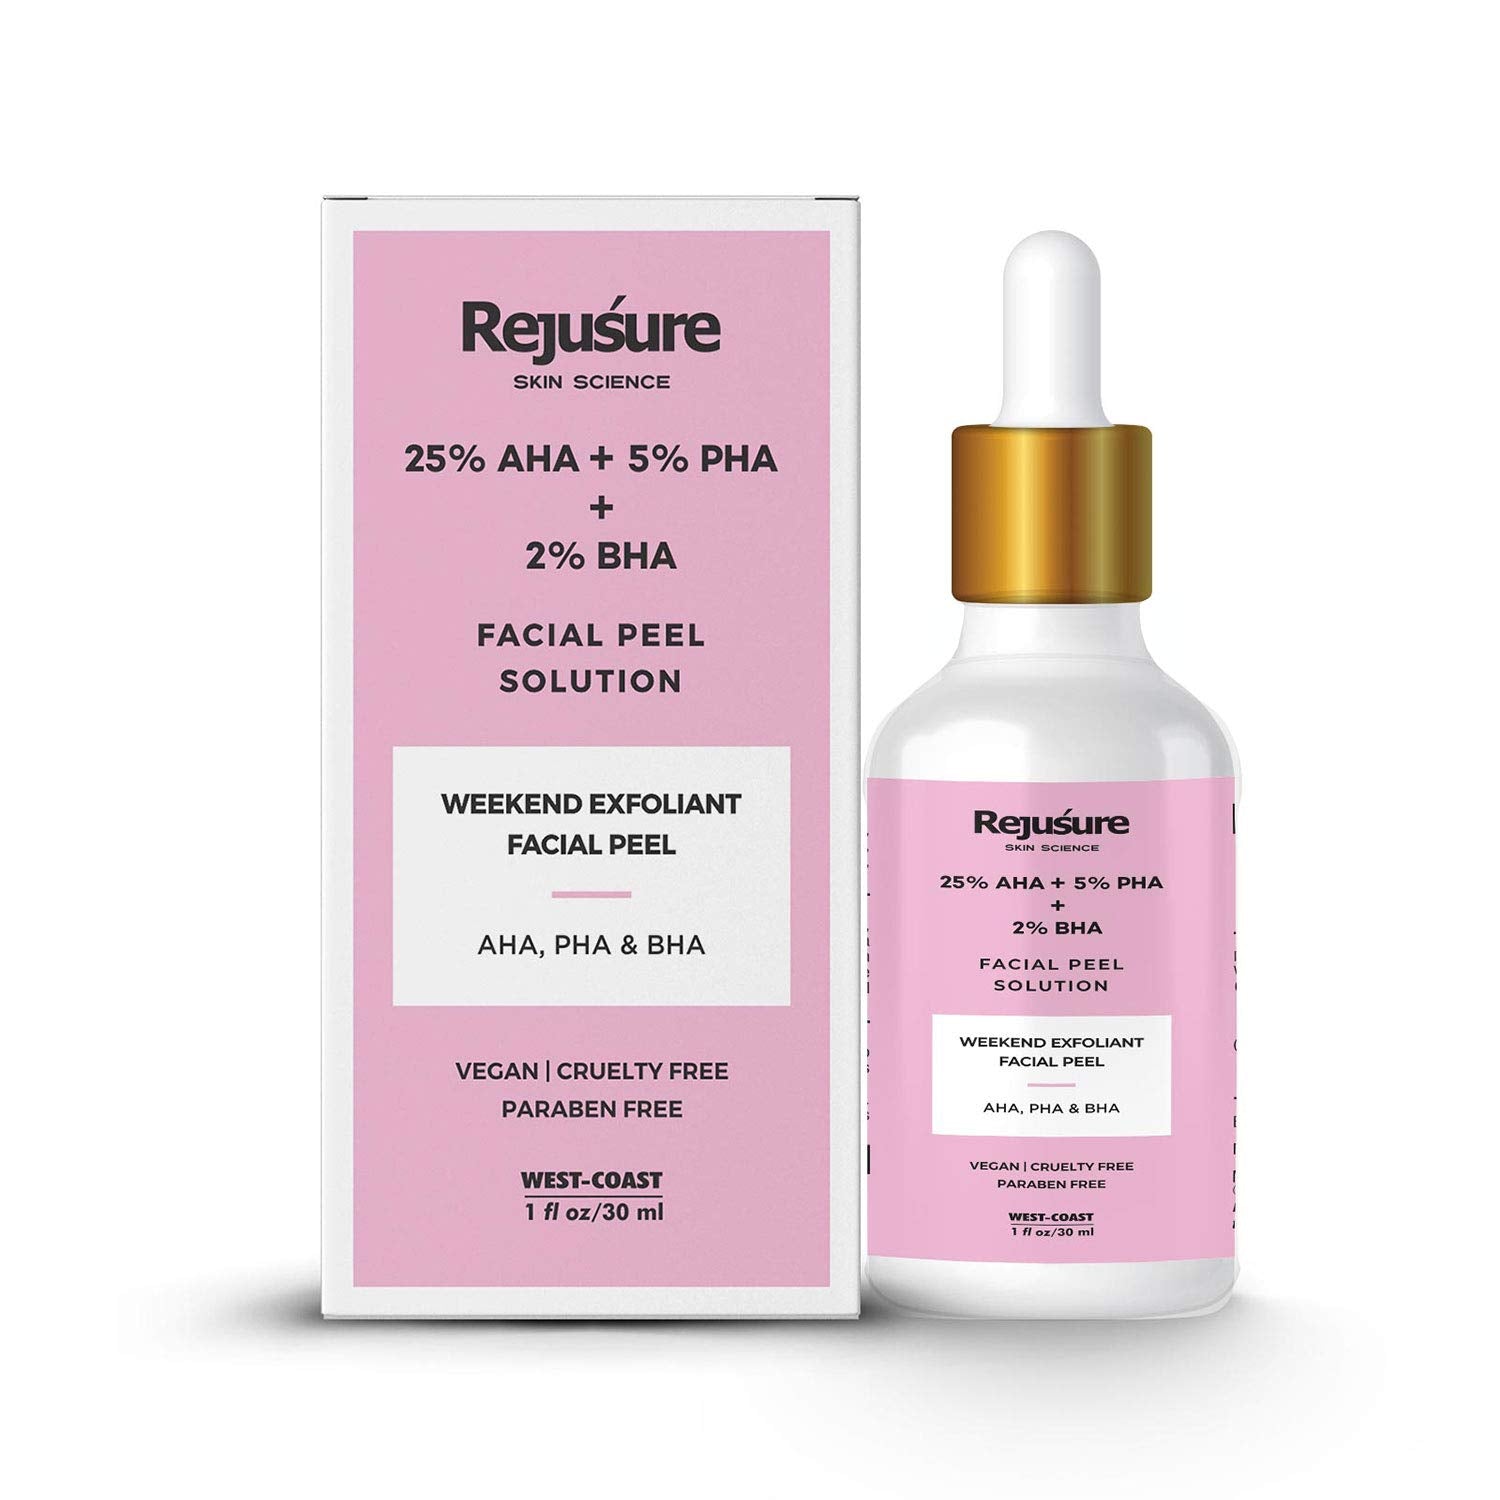 Rejusure AHA 25% + PHA 5% + BHA 2% Facial Peeling Solution for Glowing Skin, Smooth Texture & Pore Cleansing | Weekend Facial Exfoliant or Peel 30ml